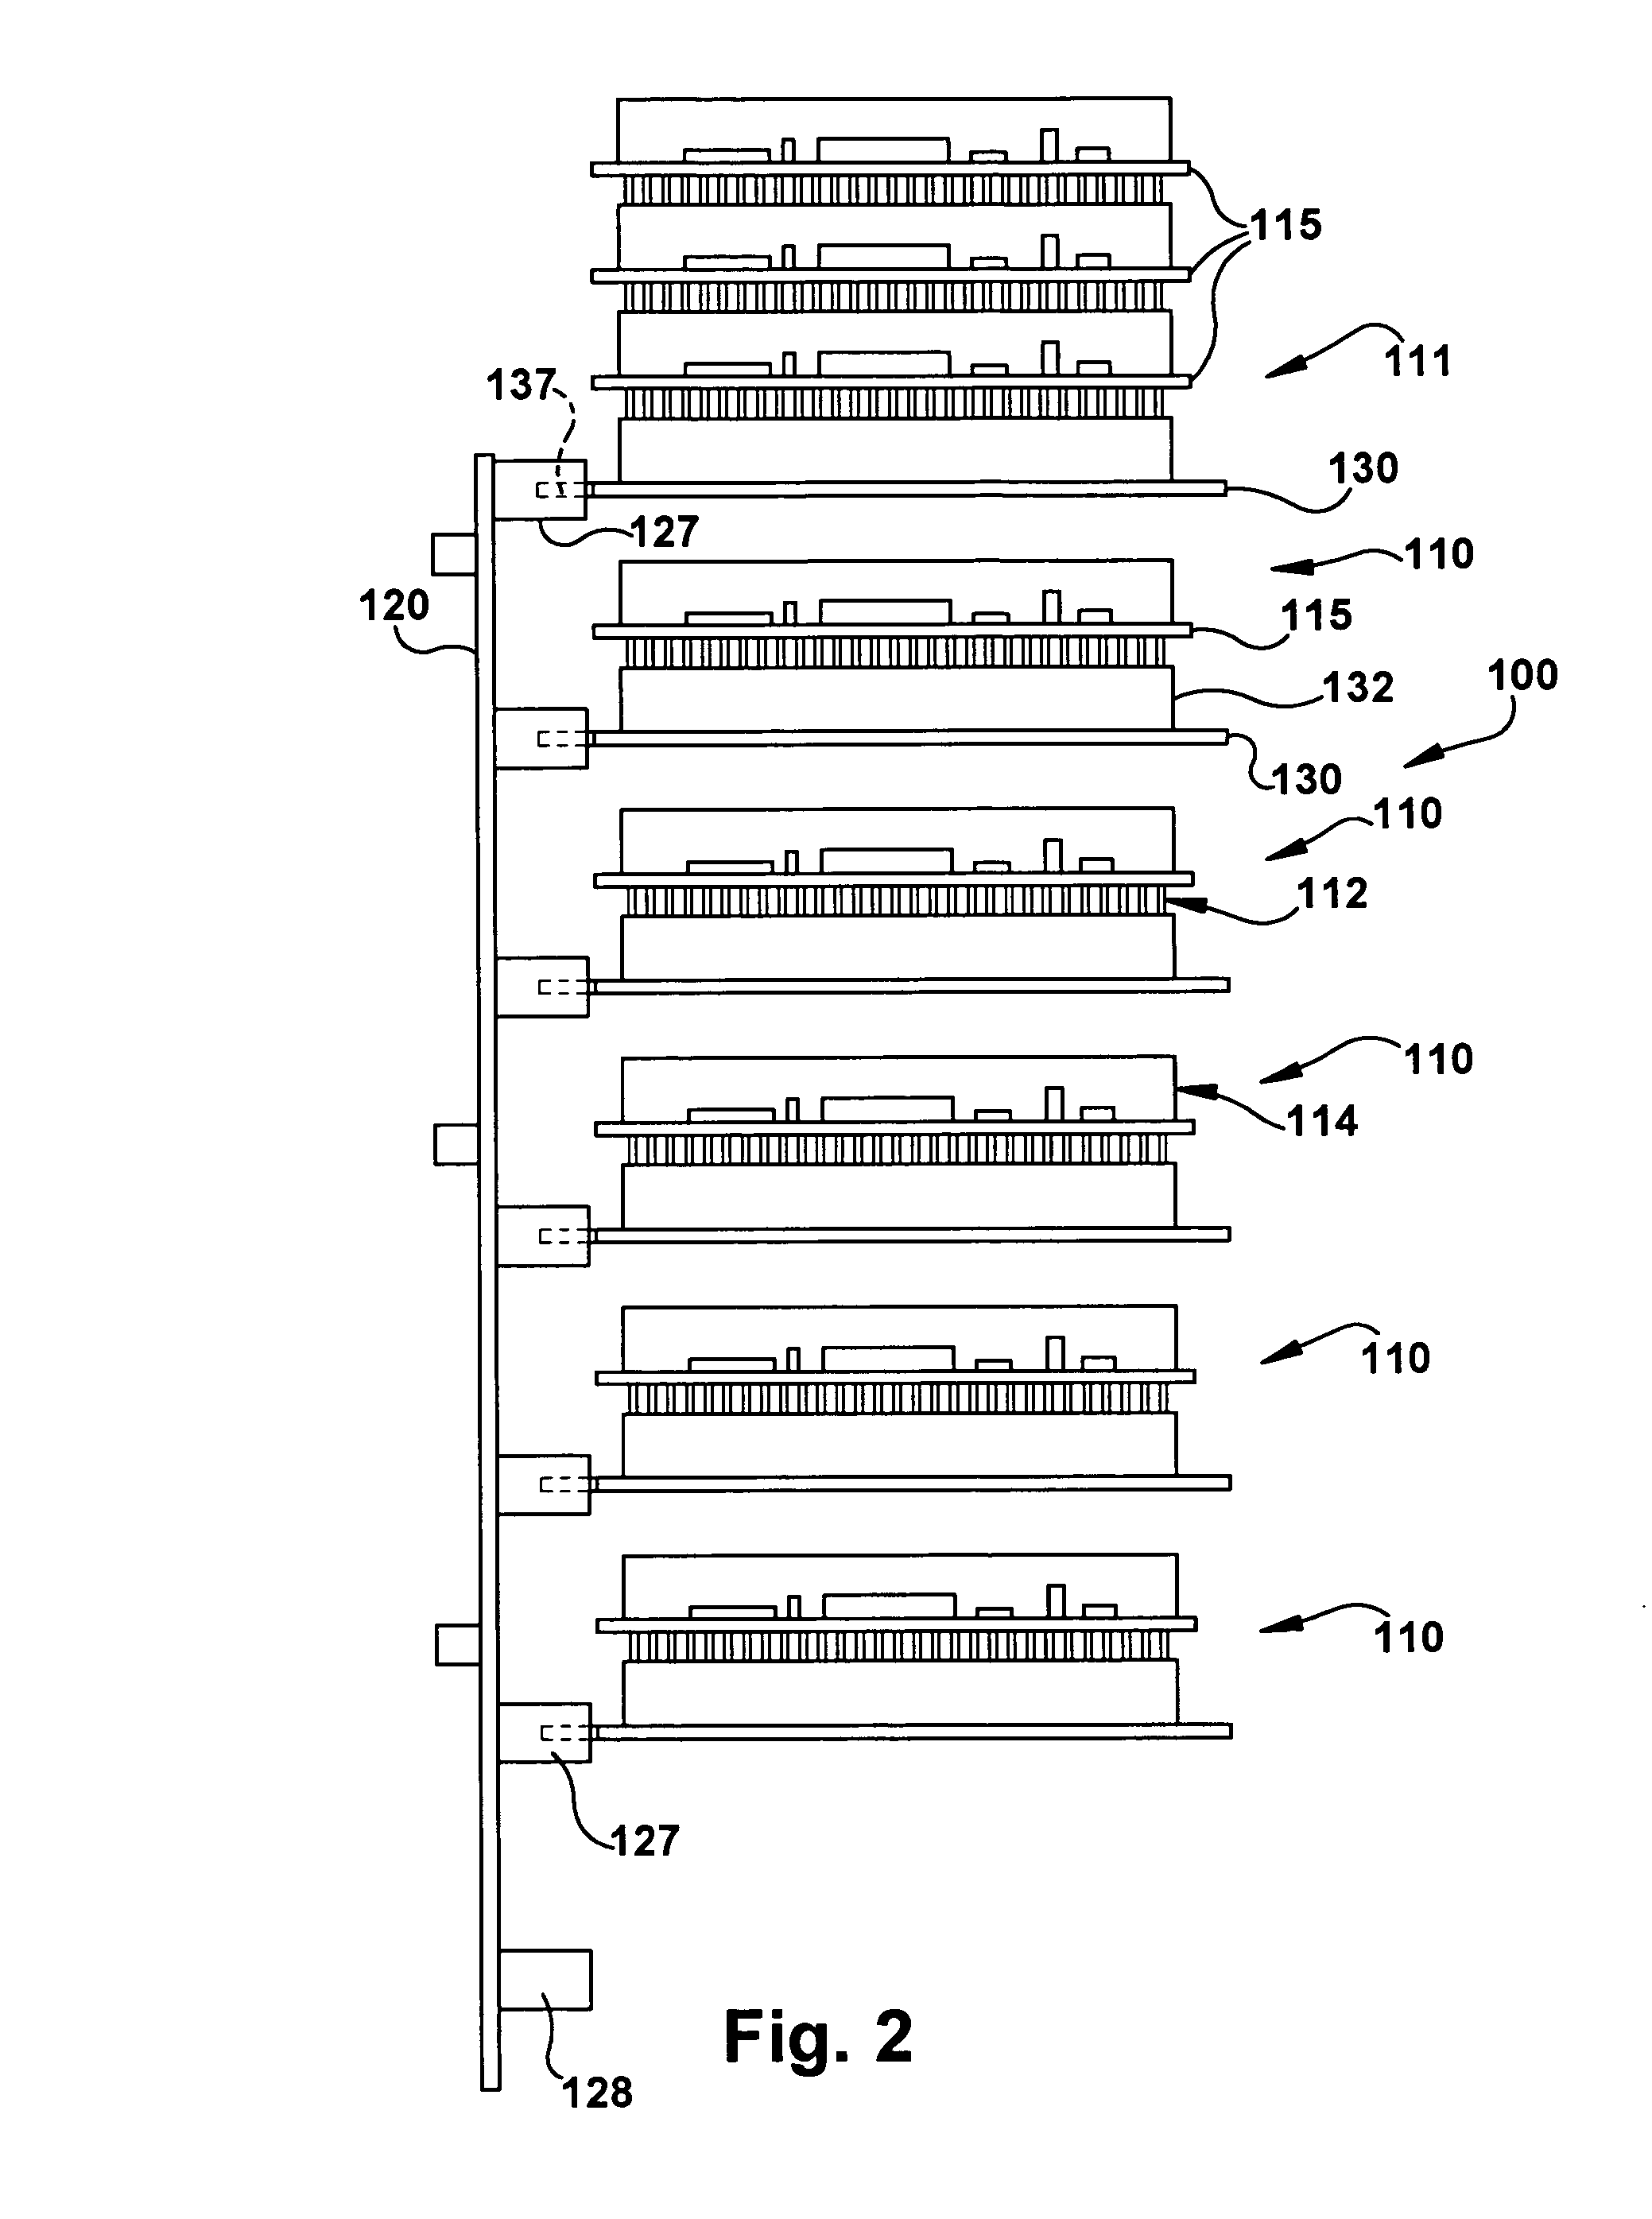 Systems and methods for electrically connecting circuit board based electronic devices